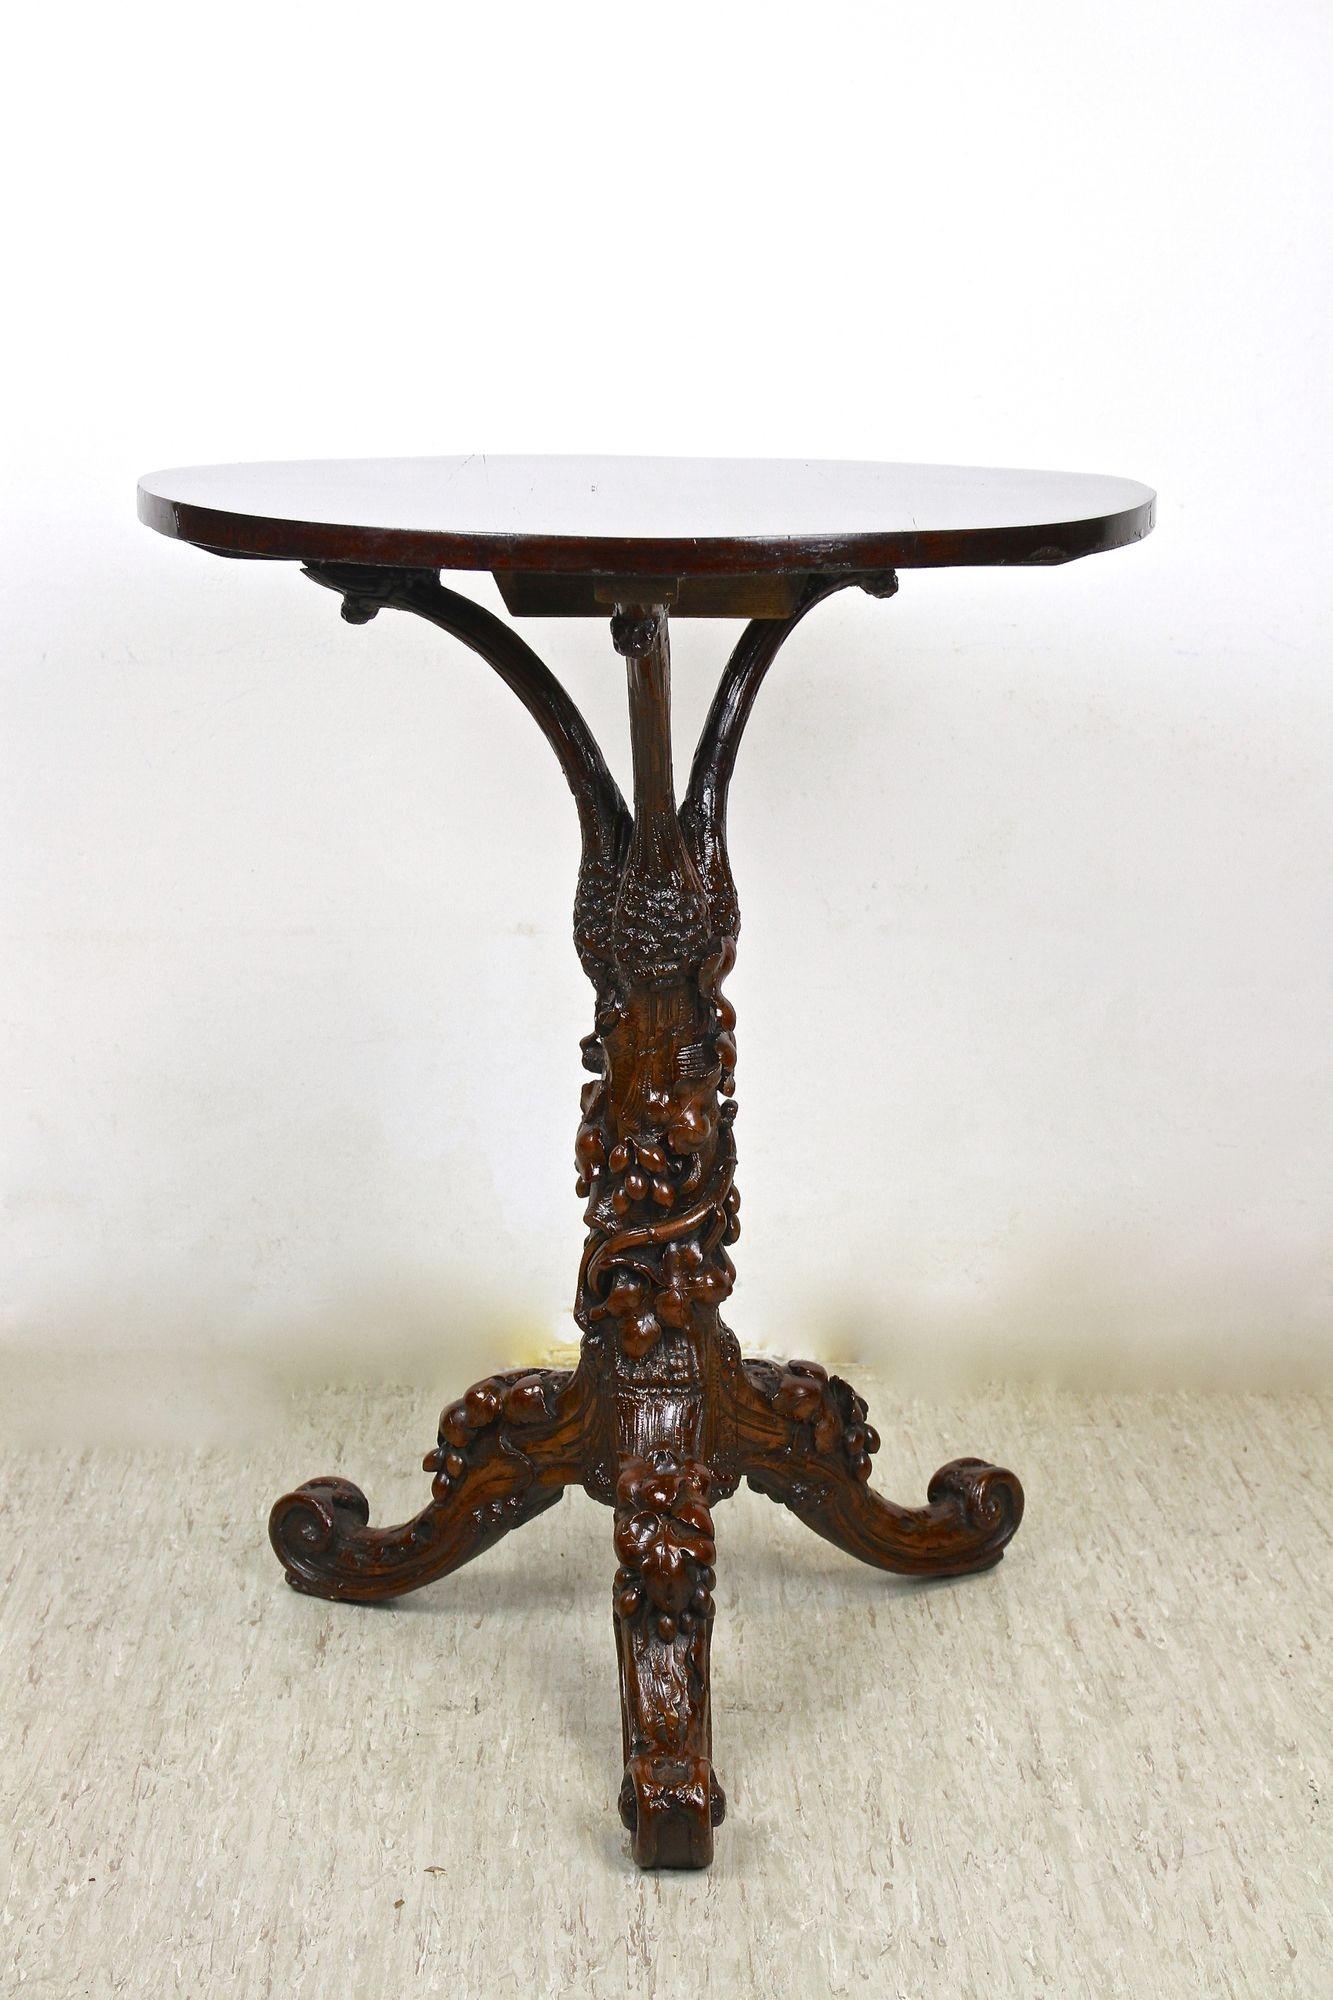 Exceptional 19th century rustic black forest side table, elaborately hand carved around 1880 in Austria. A one of a kind crafted Black Forest table with fantastic vine-theme carvings. Standing on three extraordinary designed feet, the base looks a